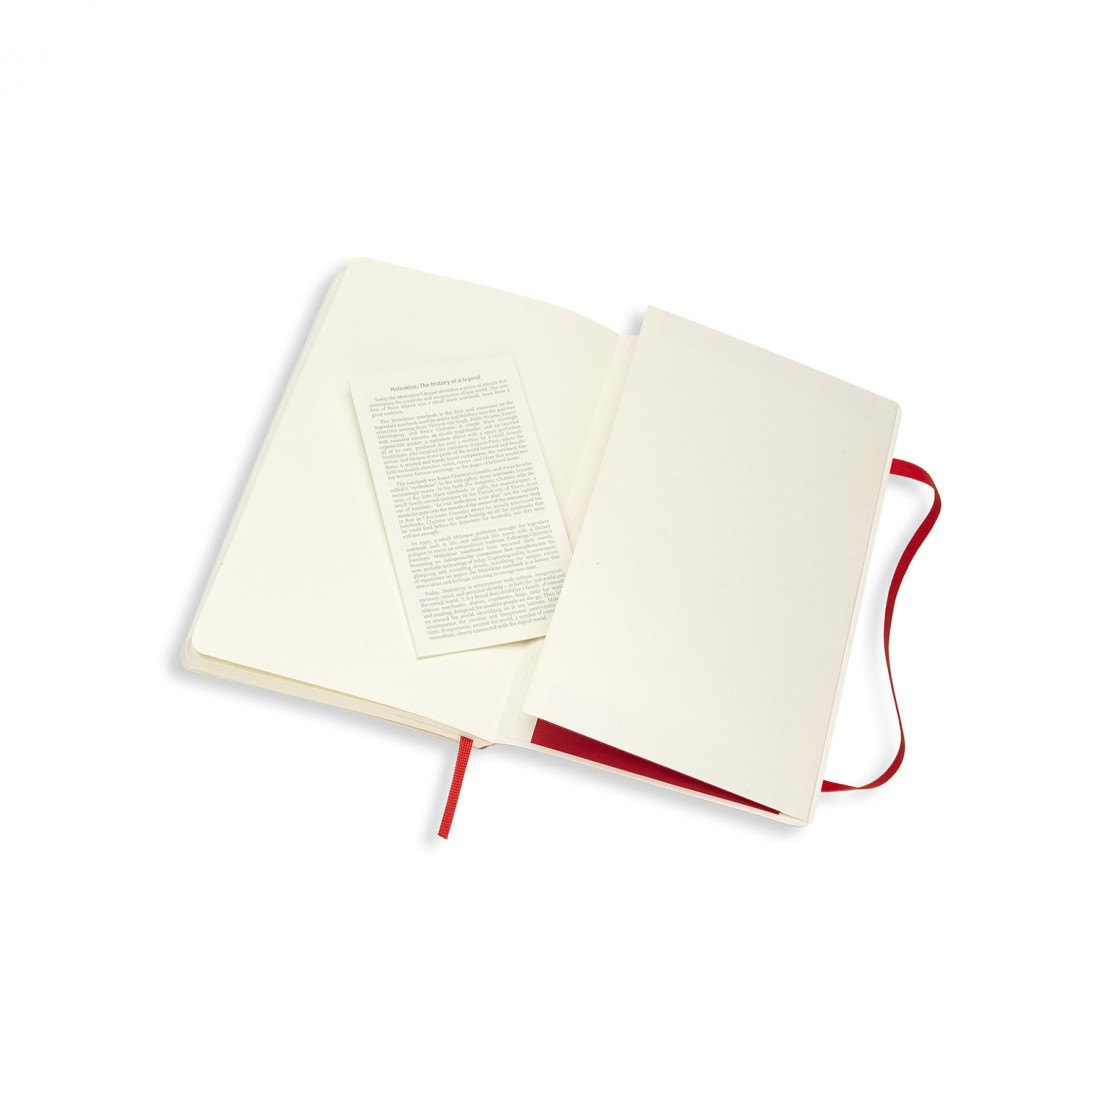 Notebook Large 13x21 Dotted Red Soft Cover Moleskine